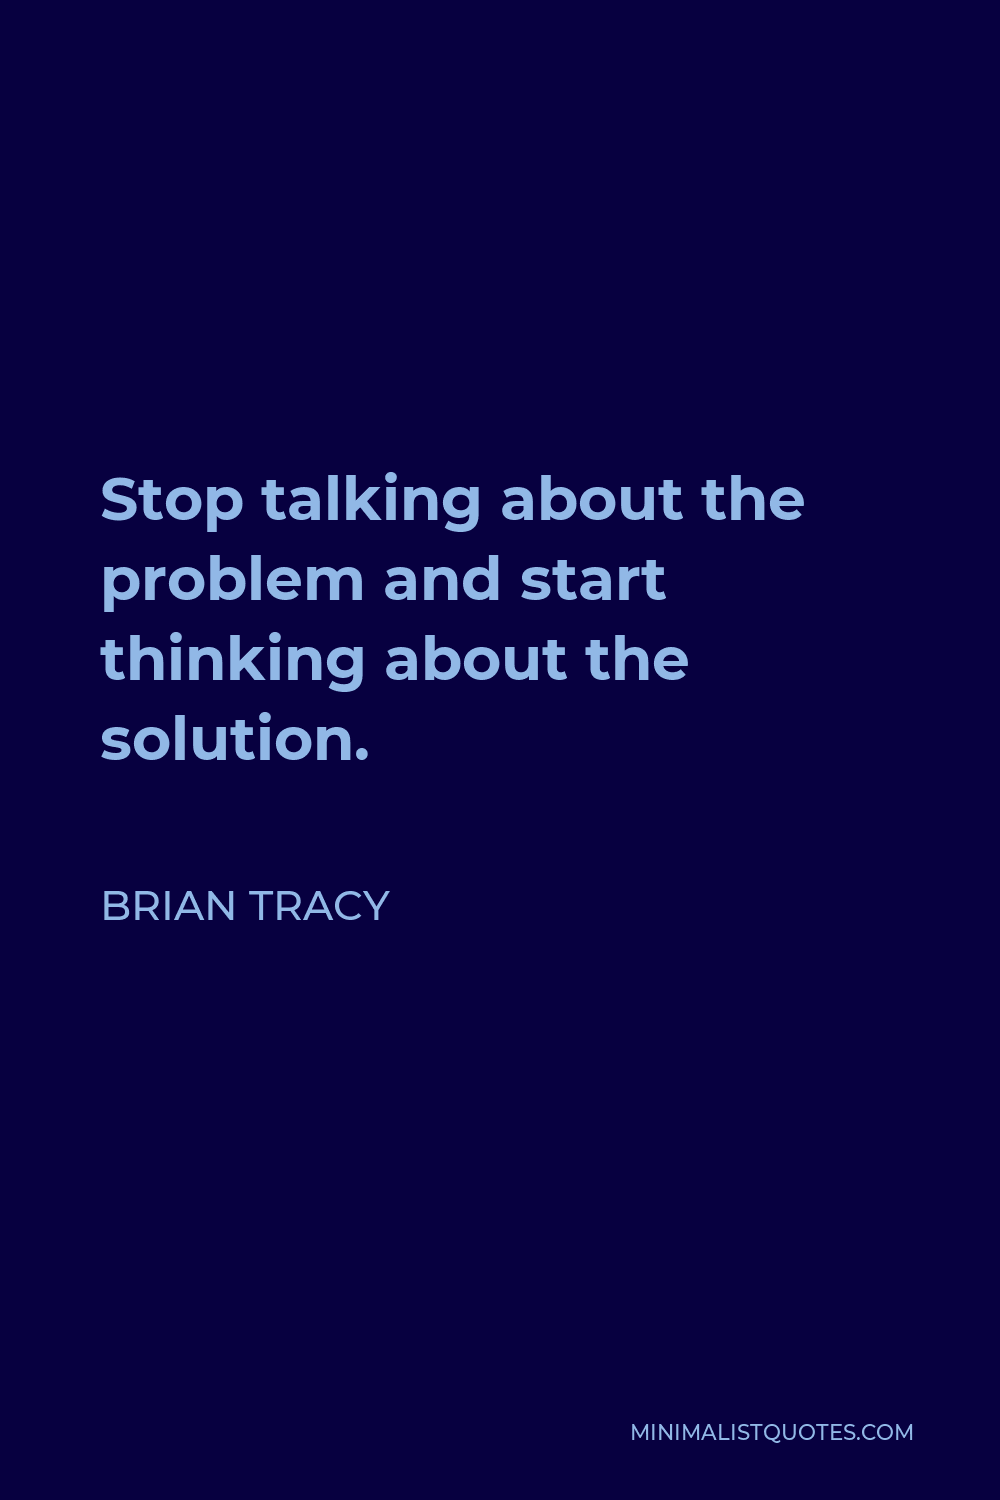 Brian Tracy Quote - Stop talking about the problem and start thinking about the solution.